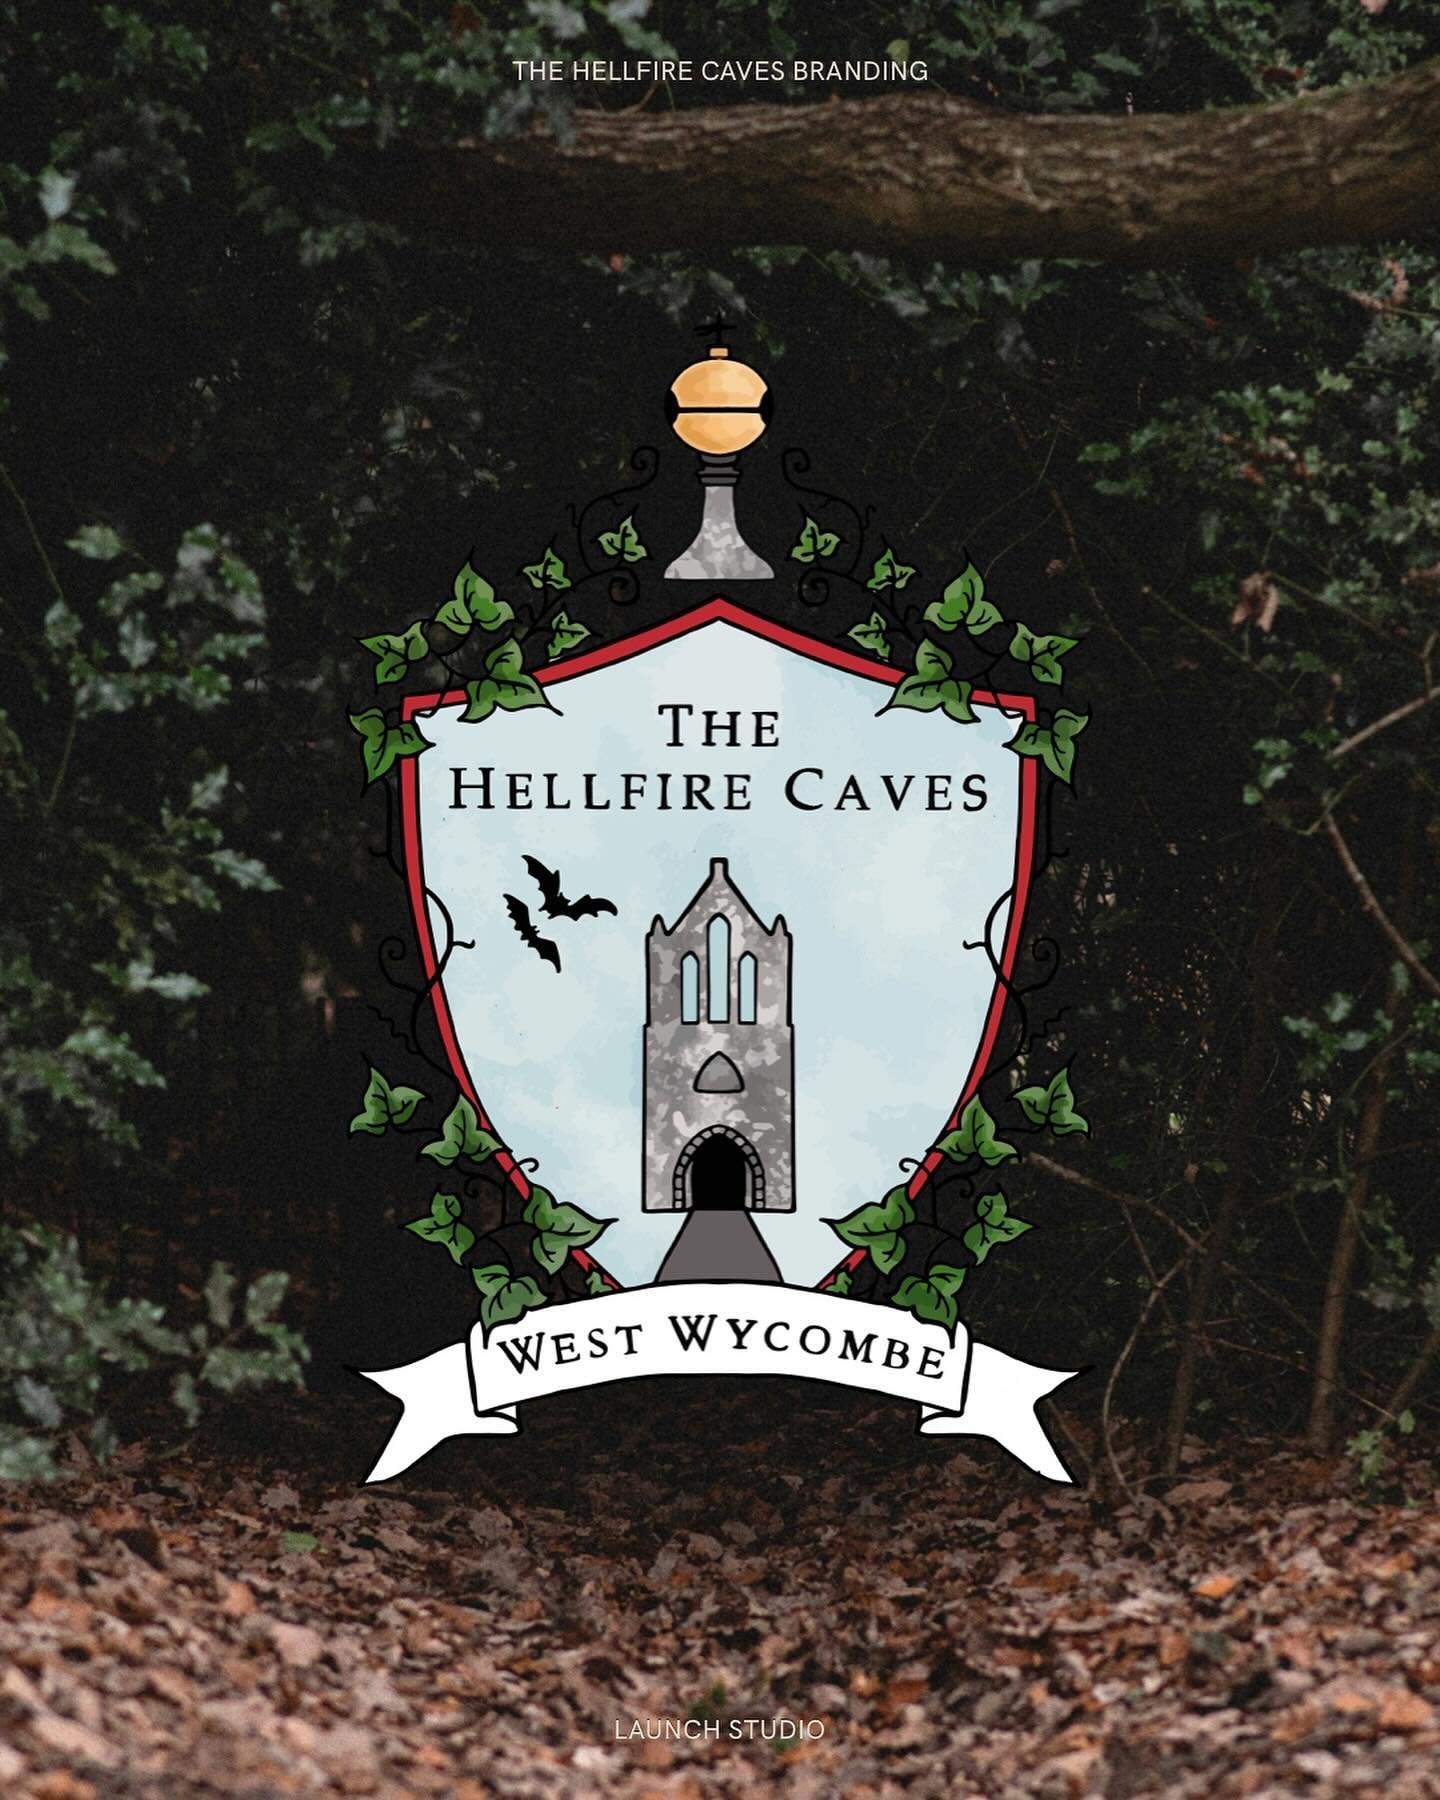 We&rsquo;ve been working with the team at @hellfirecaves (part of the @westwycombeestate ) to expand their branding, ensuring they have plenty of creative devices to pair with their illustrated logo to help bring the brand to life 🦇

We&rsquo;re cur